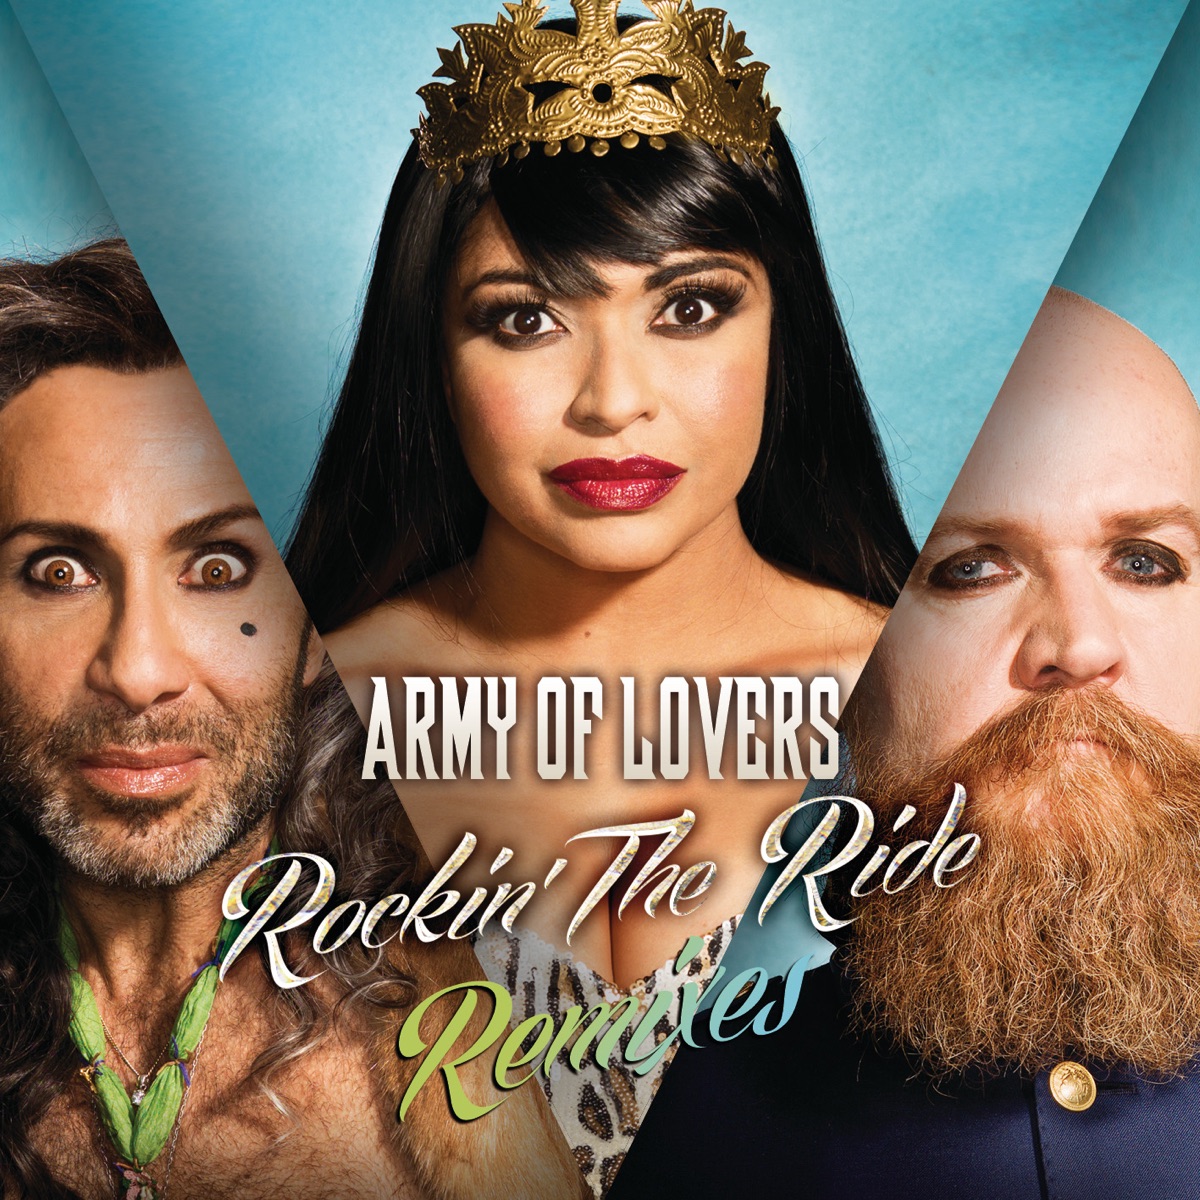 Army of Lovers: Les Greatest Hits par Army of Lovers sur Apple Music